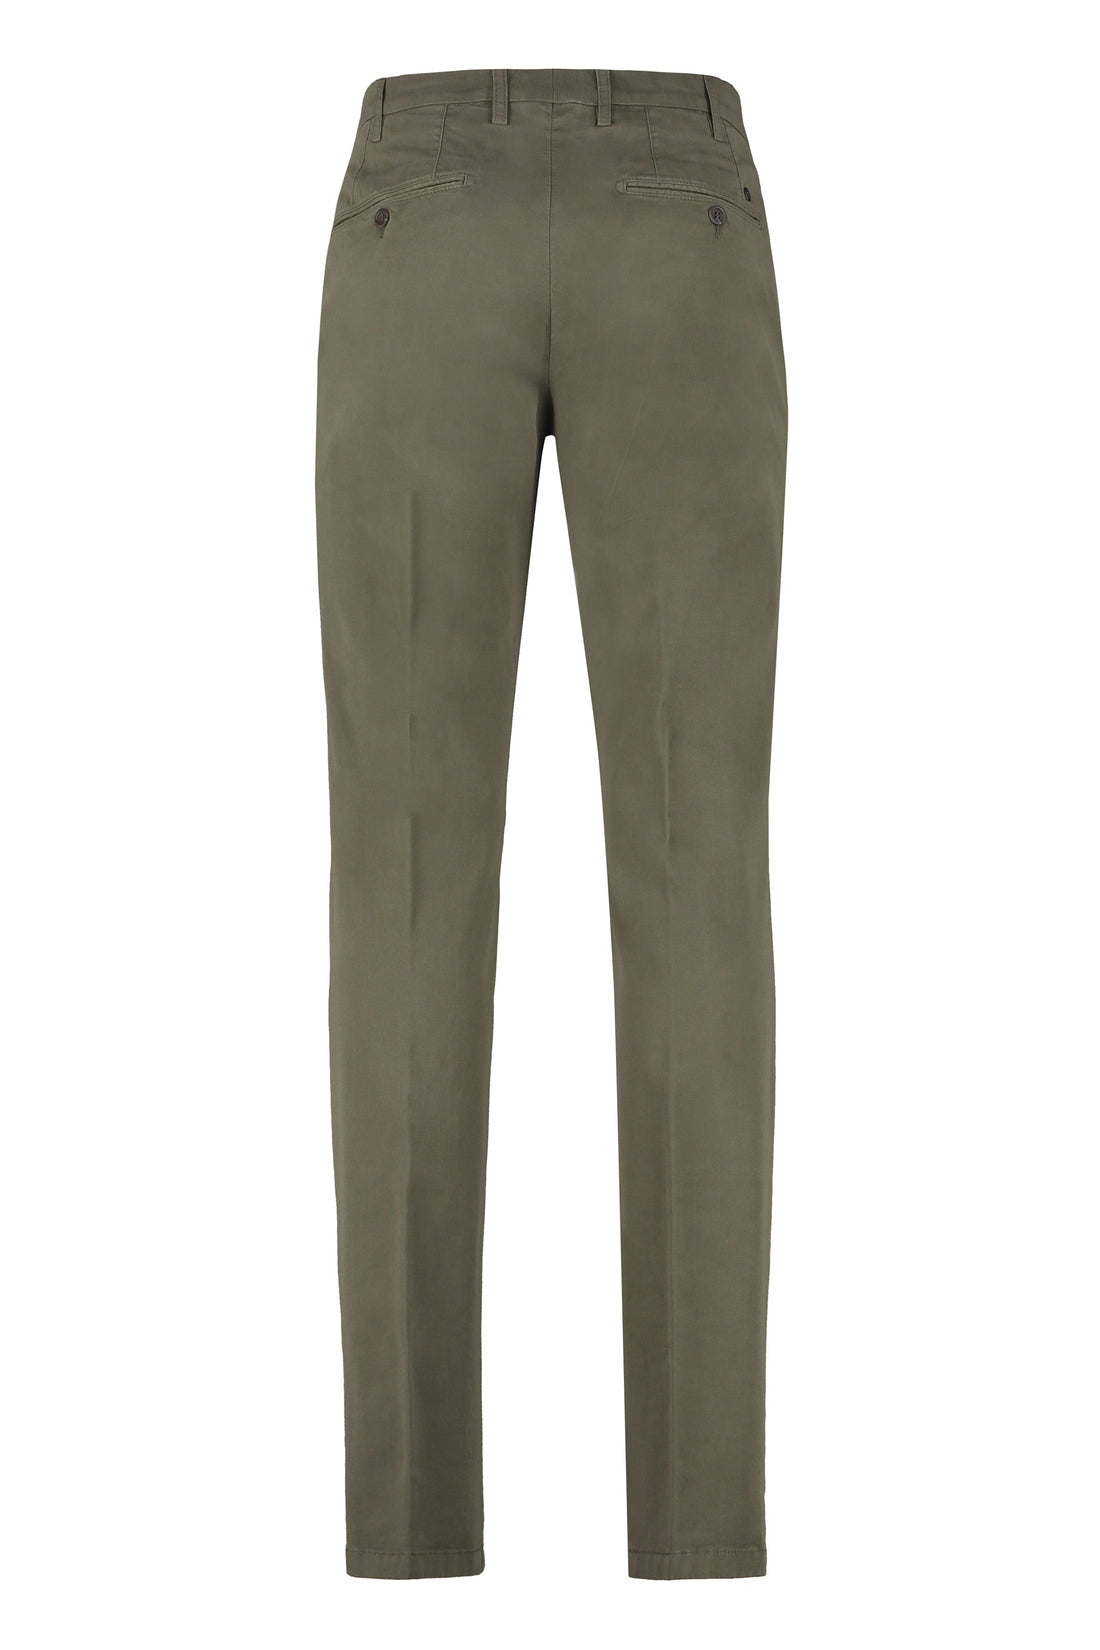 Canali-OUTLET-SALE-Cotton Chino trousers-ARCHIVIST